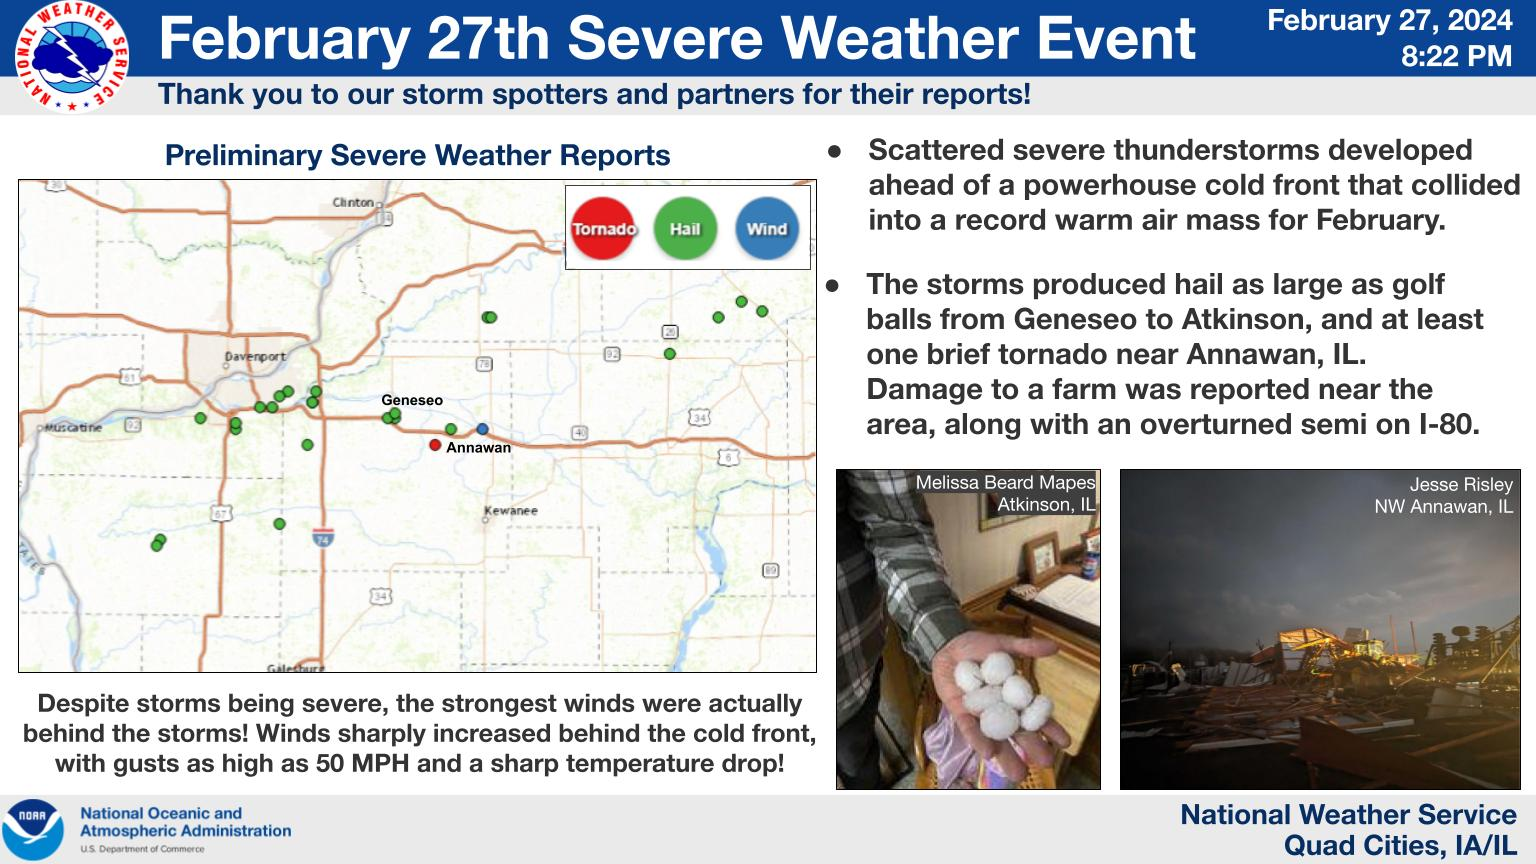 Large Hail & Henry County, IL Tornado then Extreme Temperature Drop:  February 27, 2024